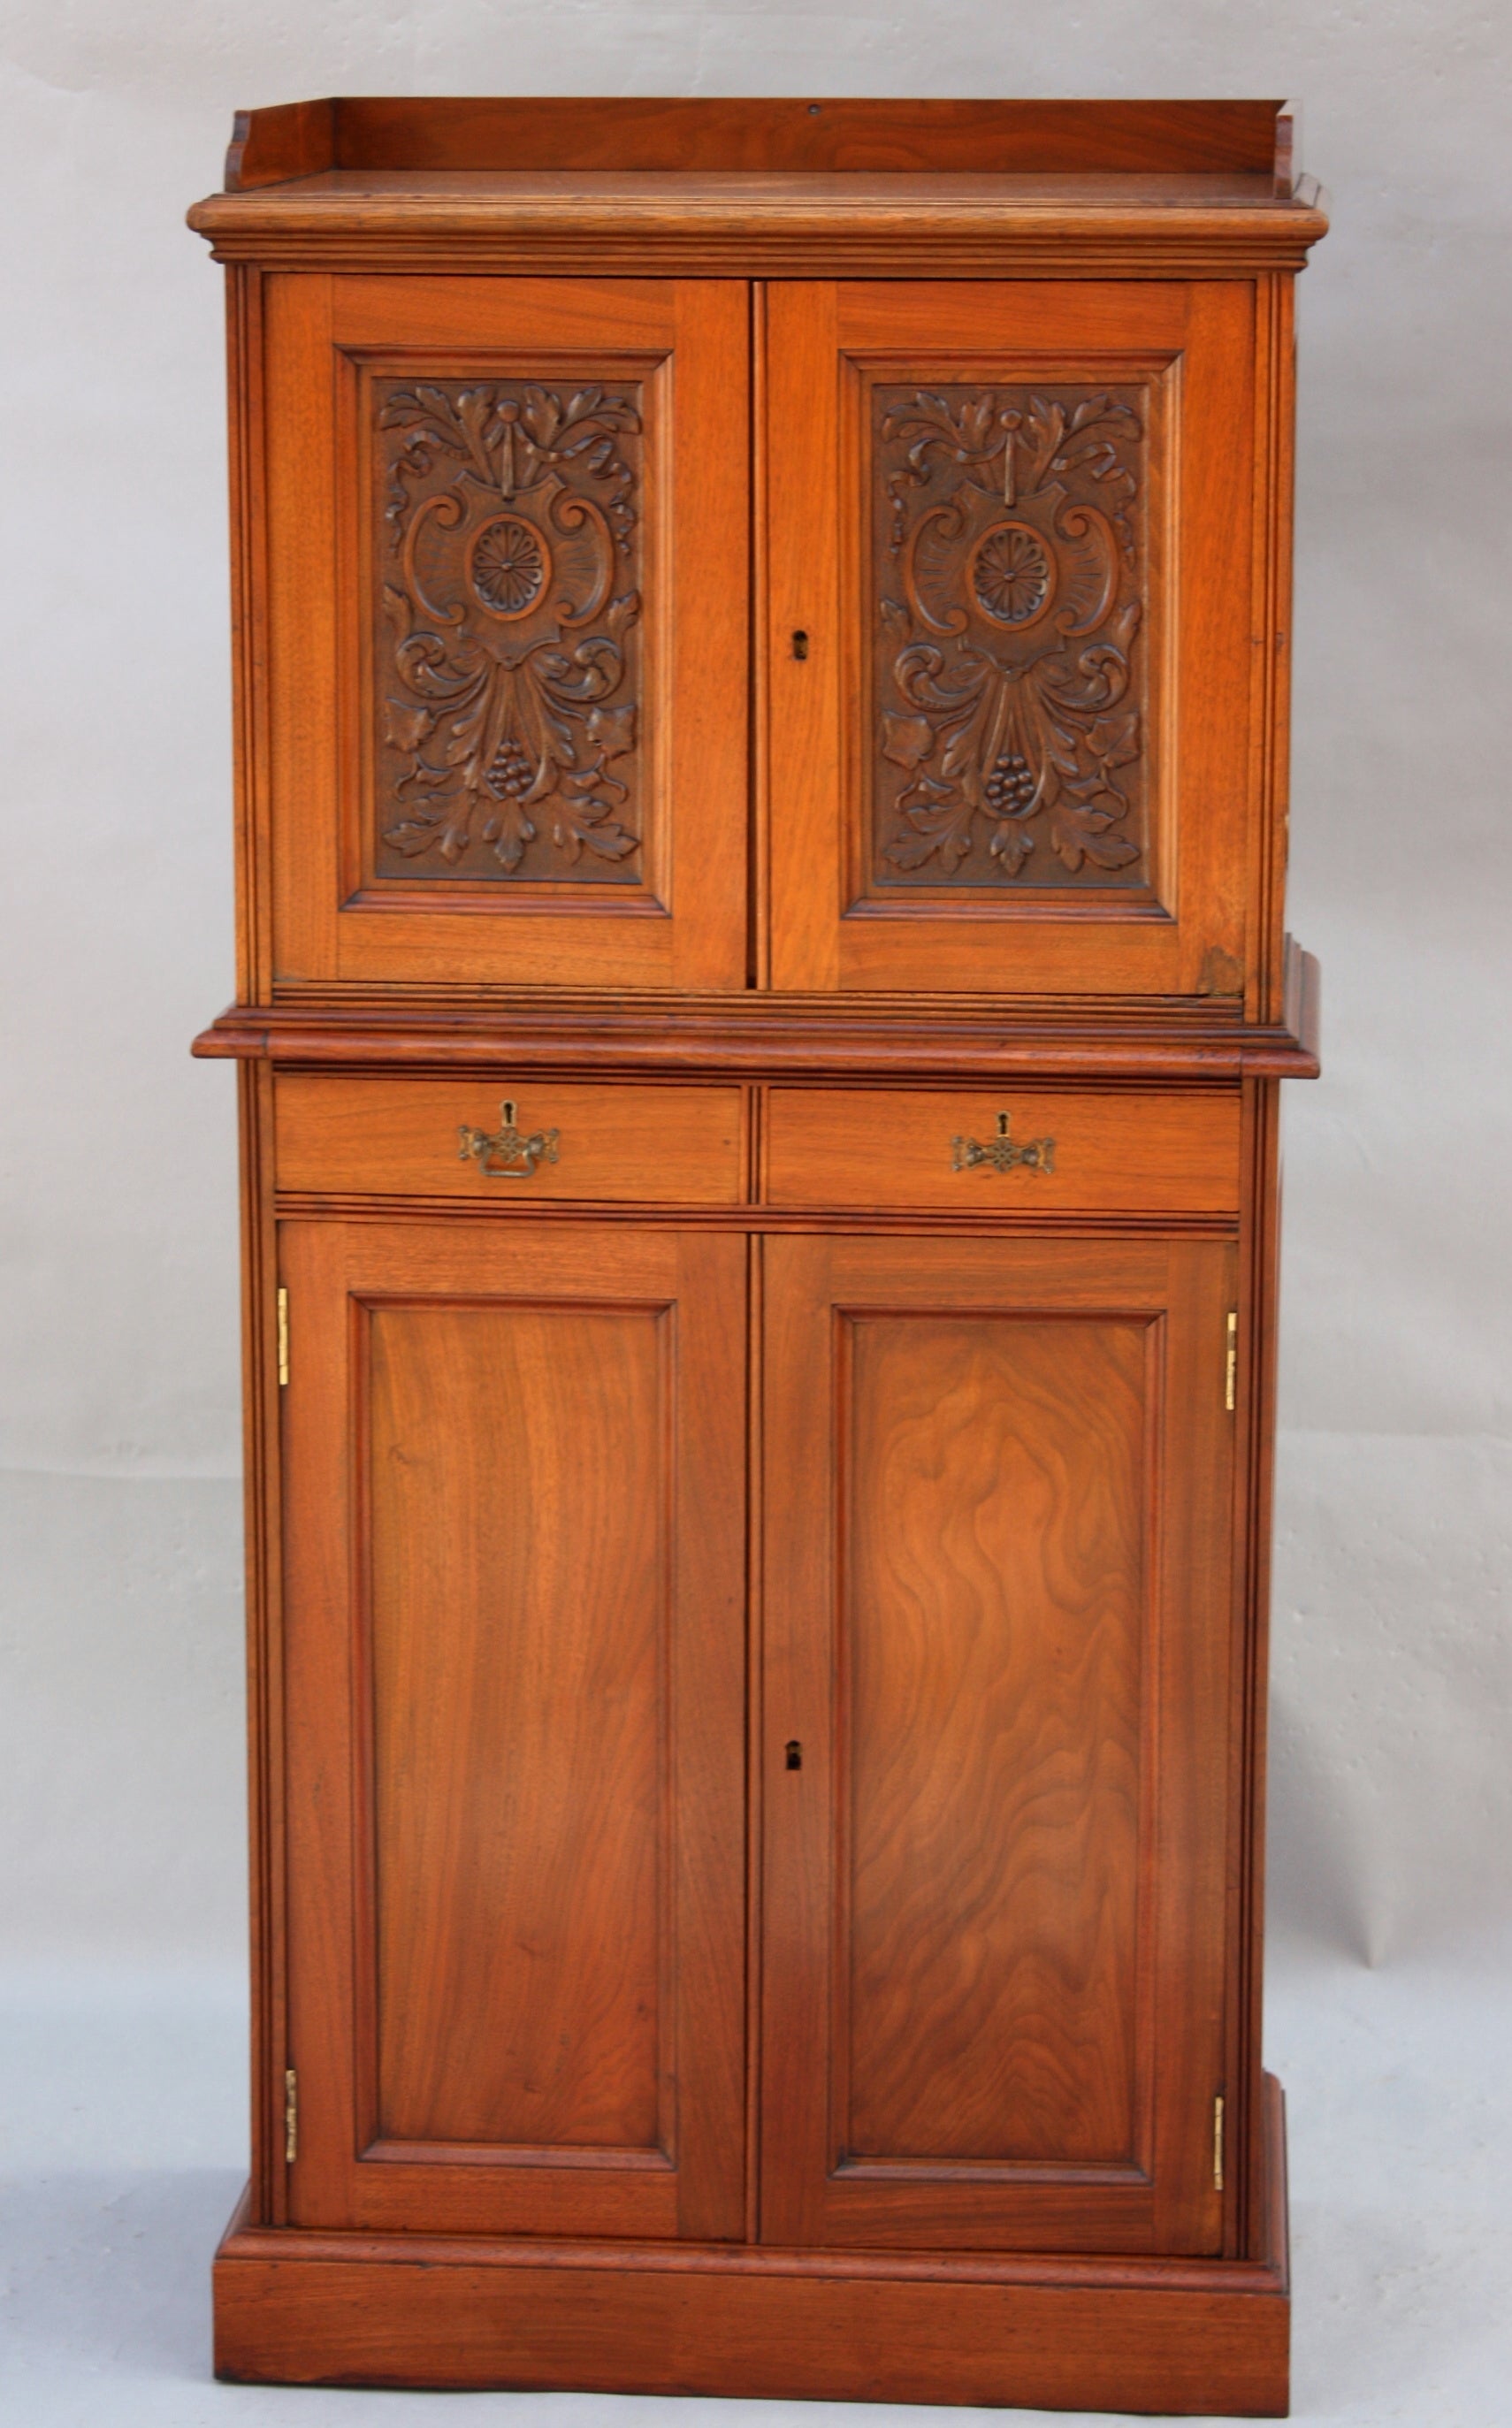 Beautiful Turn-of-the Century Dental or Medical Cabinet